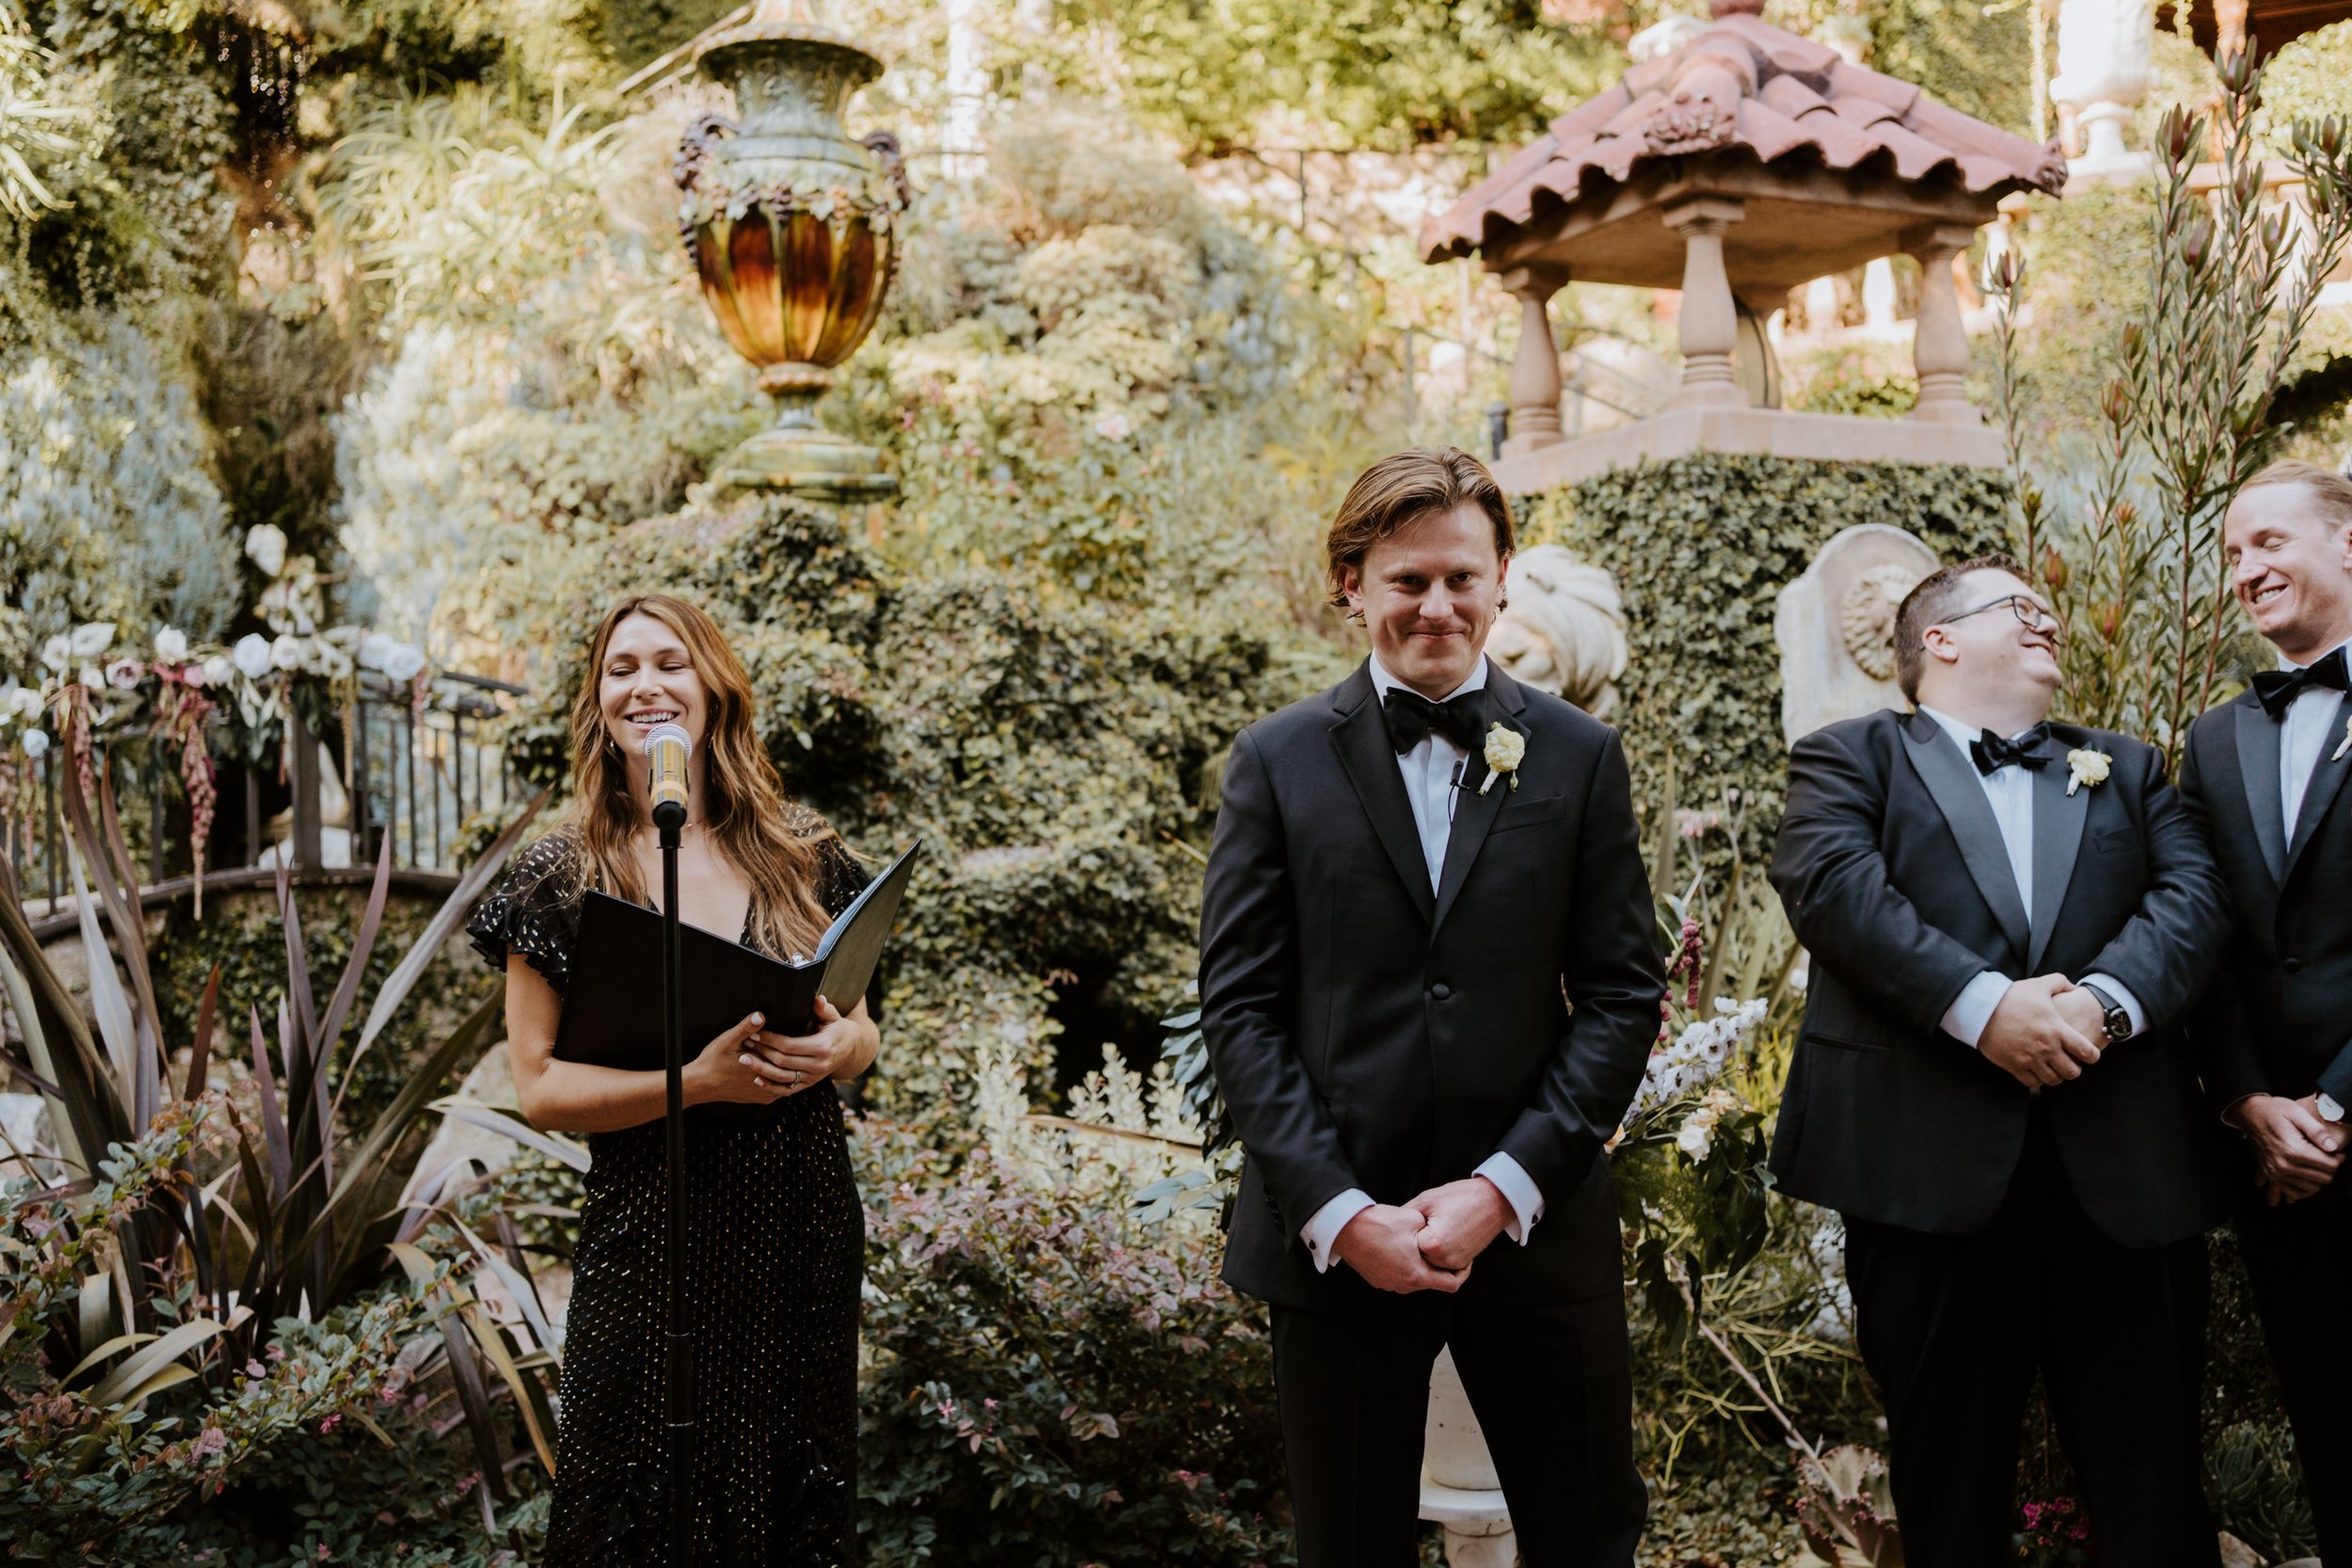 Groom at wedding ceremony at The Houdini Estate Wedding Los Angeles photography by Tida Svy